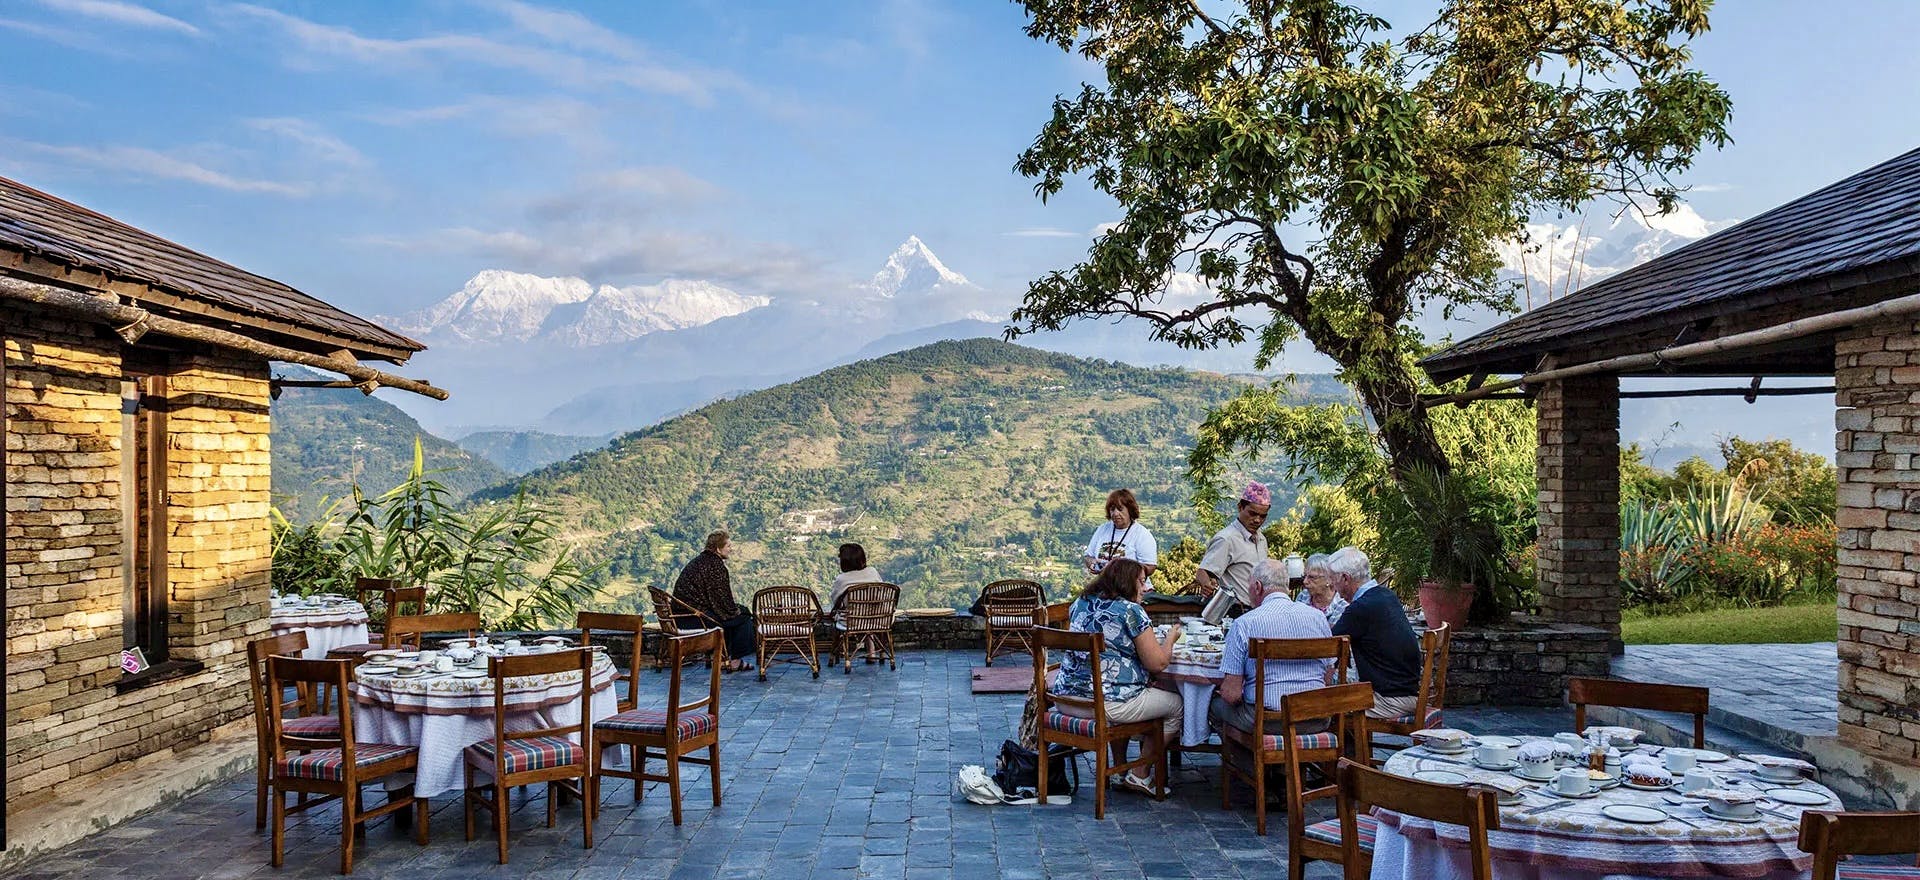 Luxury Travel In Nepal - Luxury and Professional Services